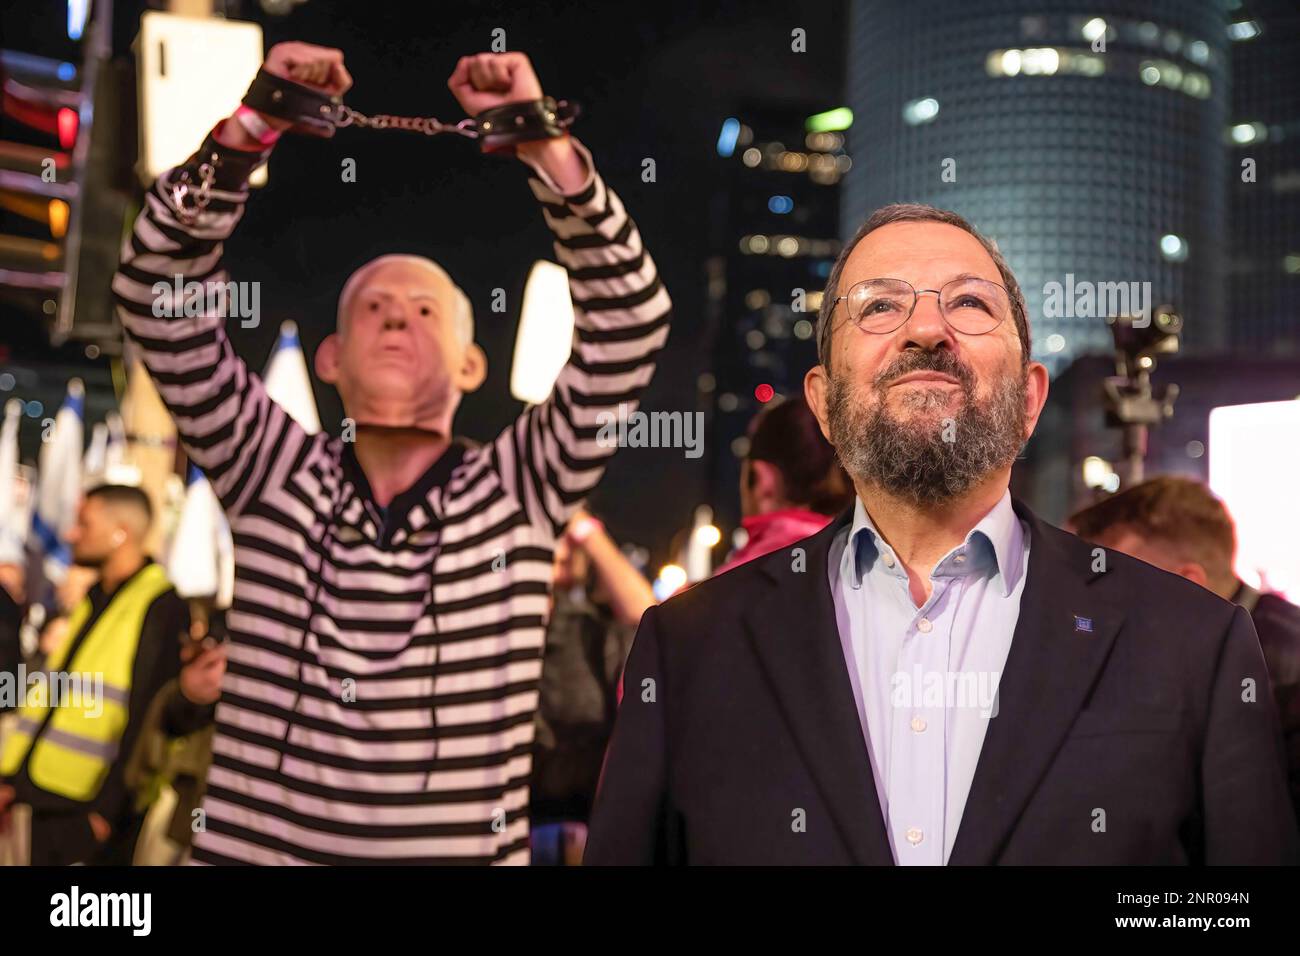 Tel Aviv, Israel. 25th Feb, 2023. Ehud Barak, former Prime Minister of Israel, looks on as he listen to a speech while a protestor dressed in a convict uniform and wearing a Benjamin Netanyahu mask lifts his handcuffed arms in the air during the demonstration. Over 150,000 people protested in Tel Aviv against Netanyahu's far-right government and its controversial legal reform. 21 demonstrators were arrested while blocking the Ayalon highway. (Photo by Matan Golan/SOPA Images/Sipa USA) Credit: Sipa USA/Alamy Live News Stock Photo